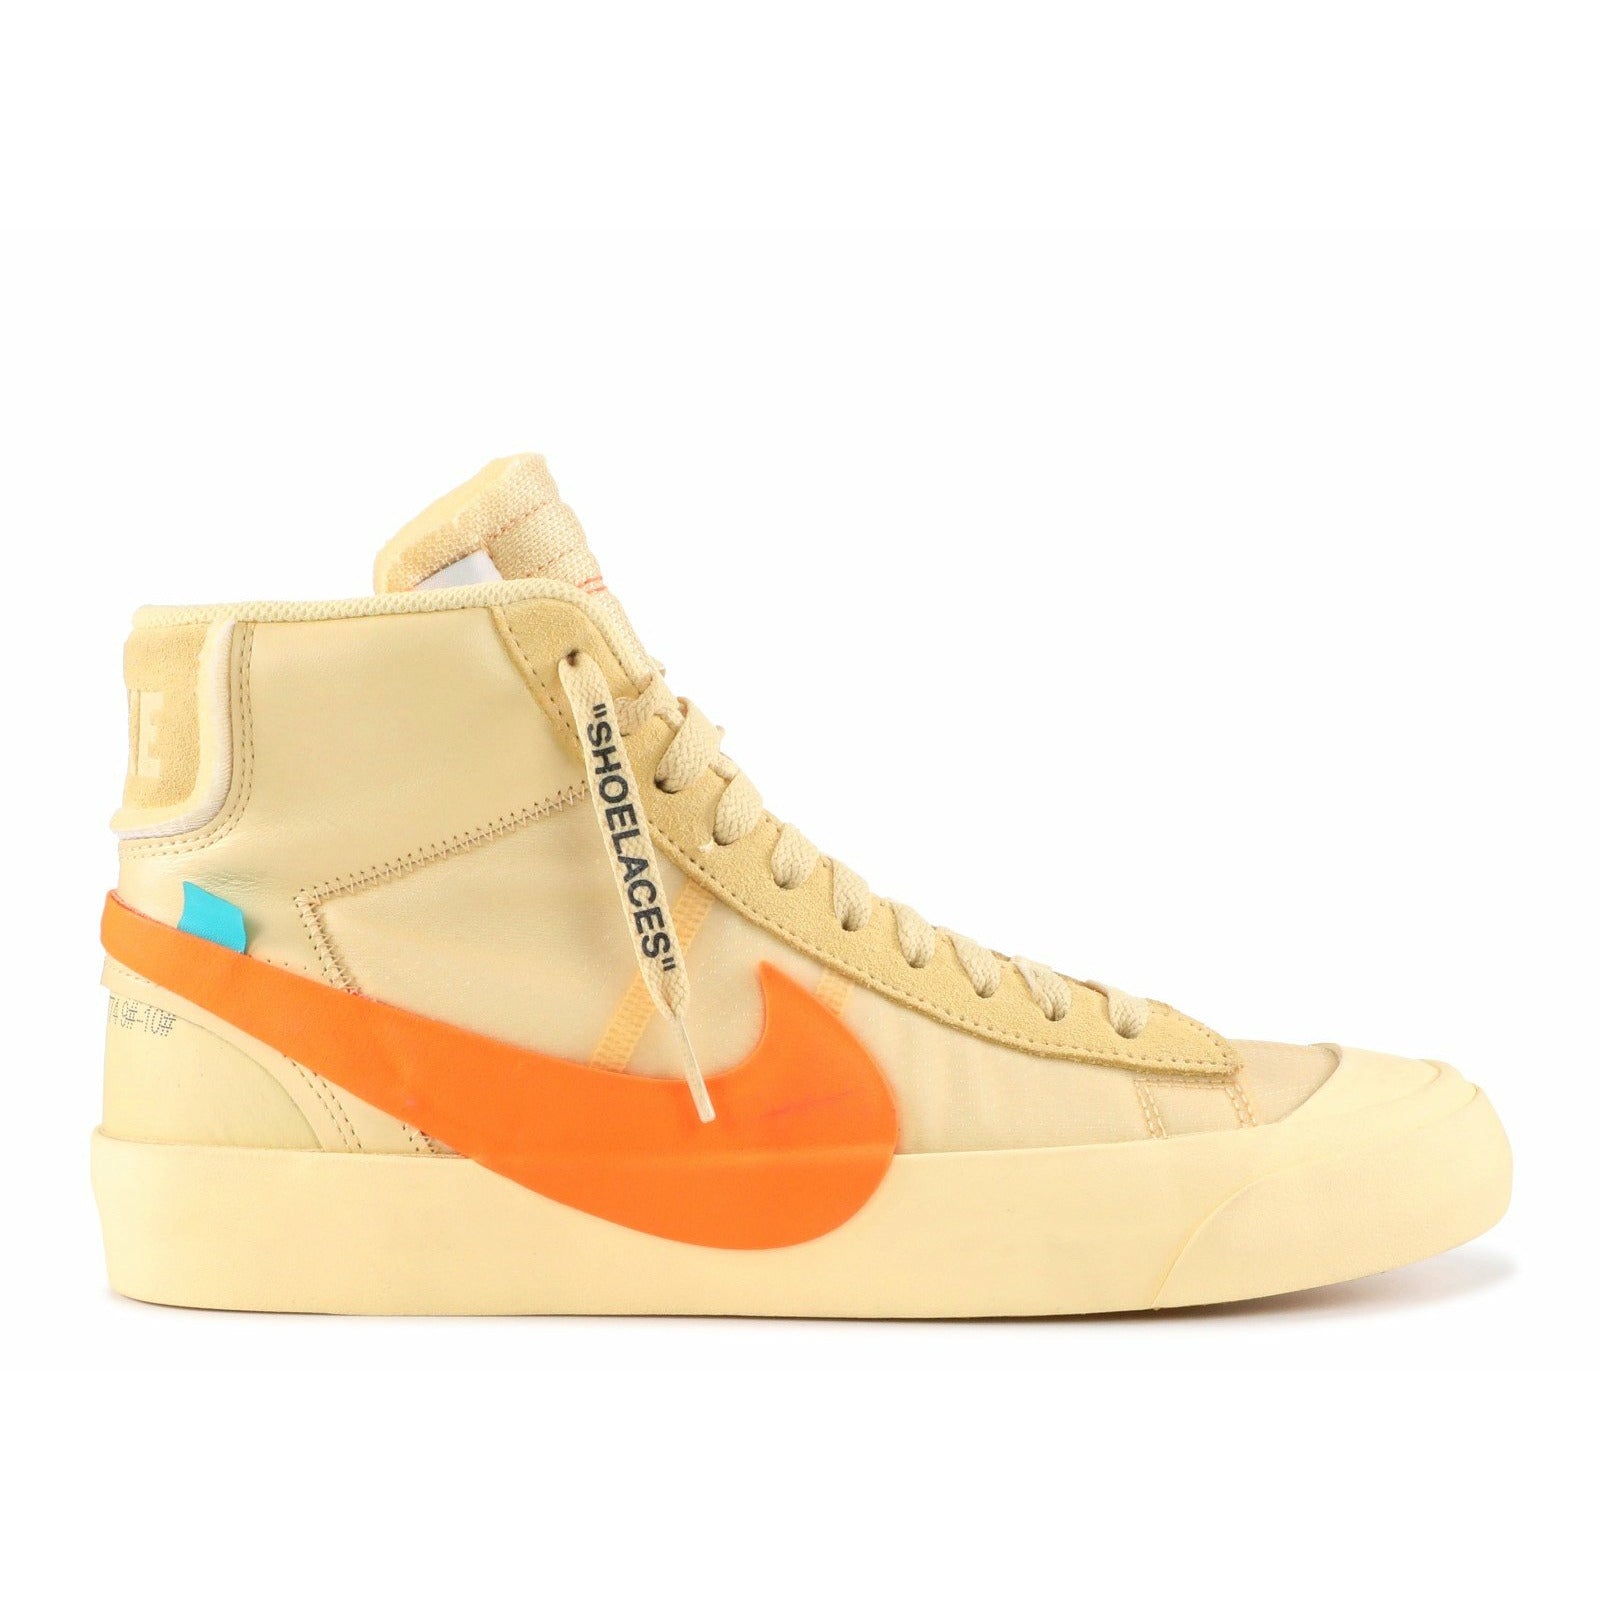 Nike Off White Blazer Mid All Hallow's Eve from Nike